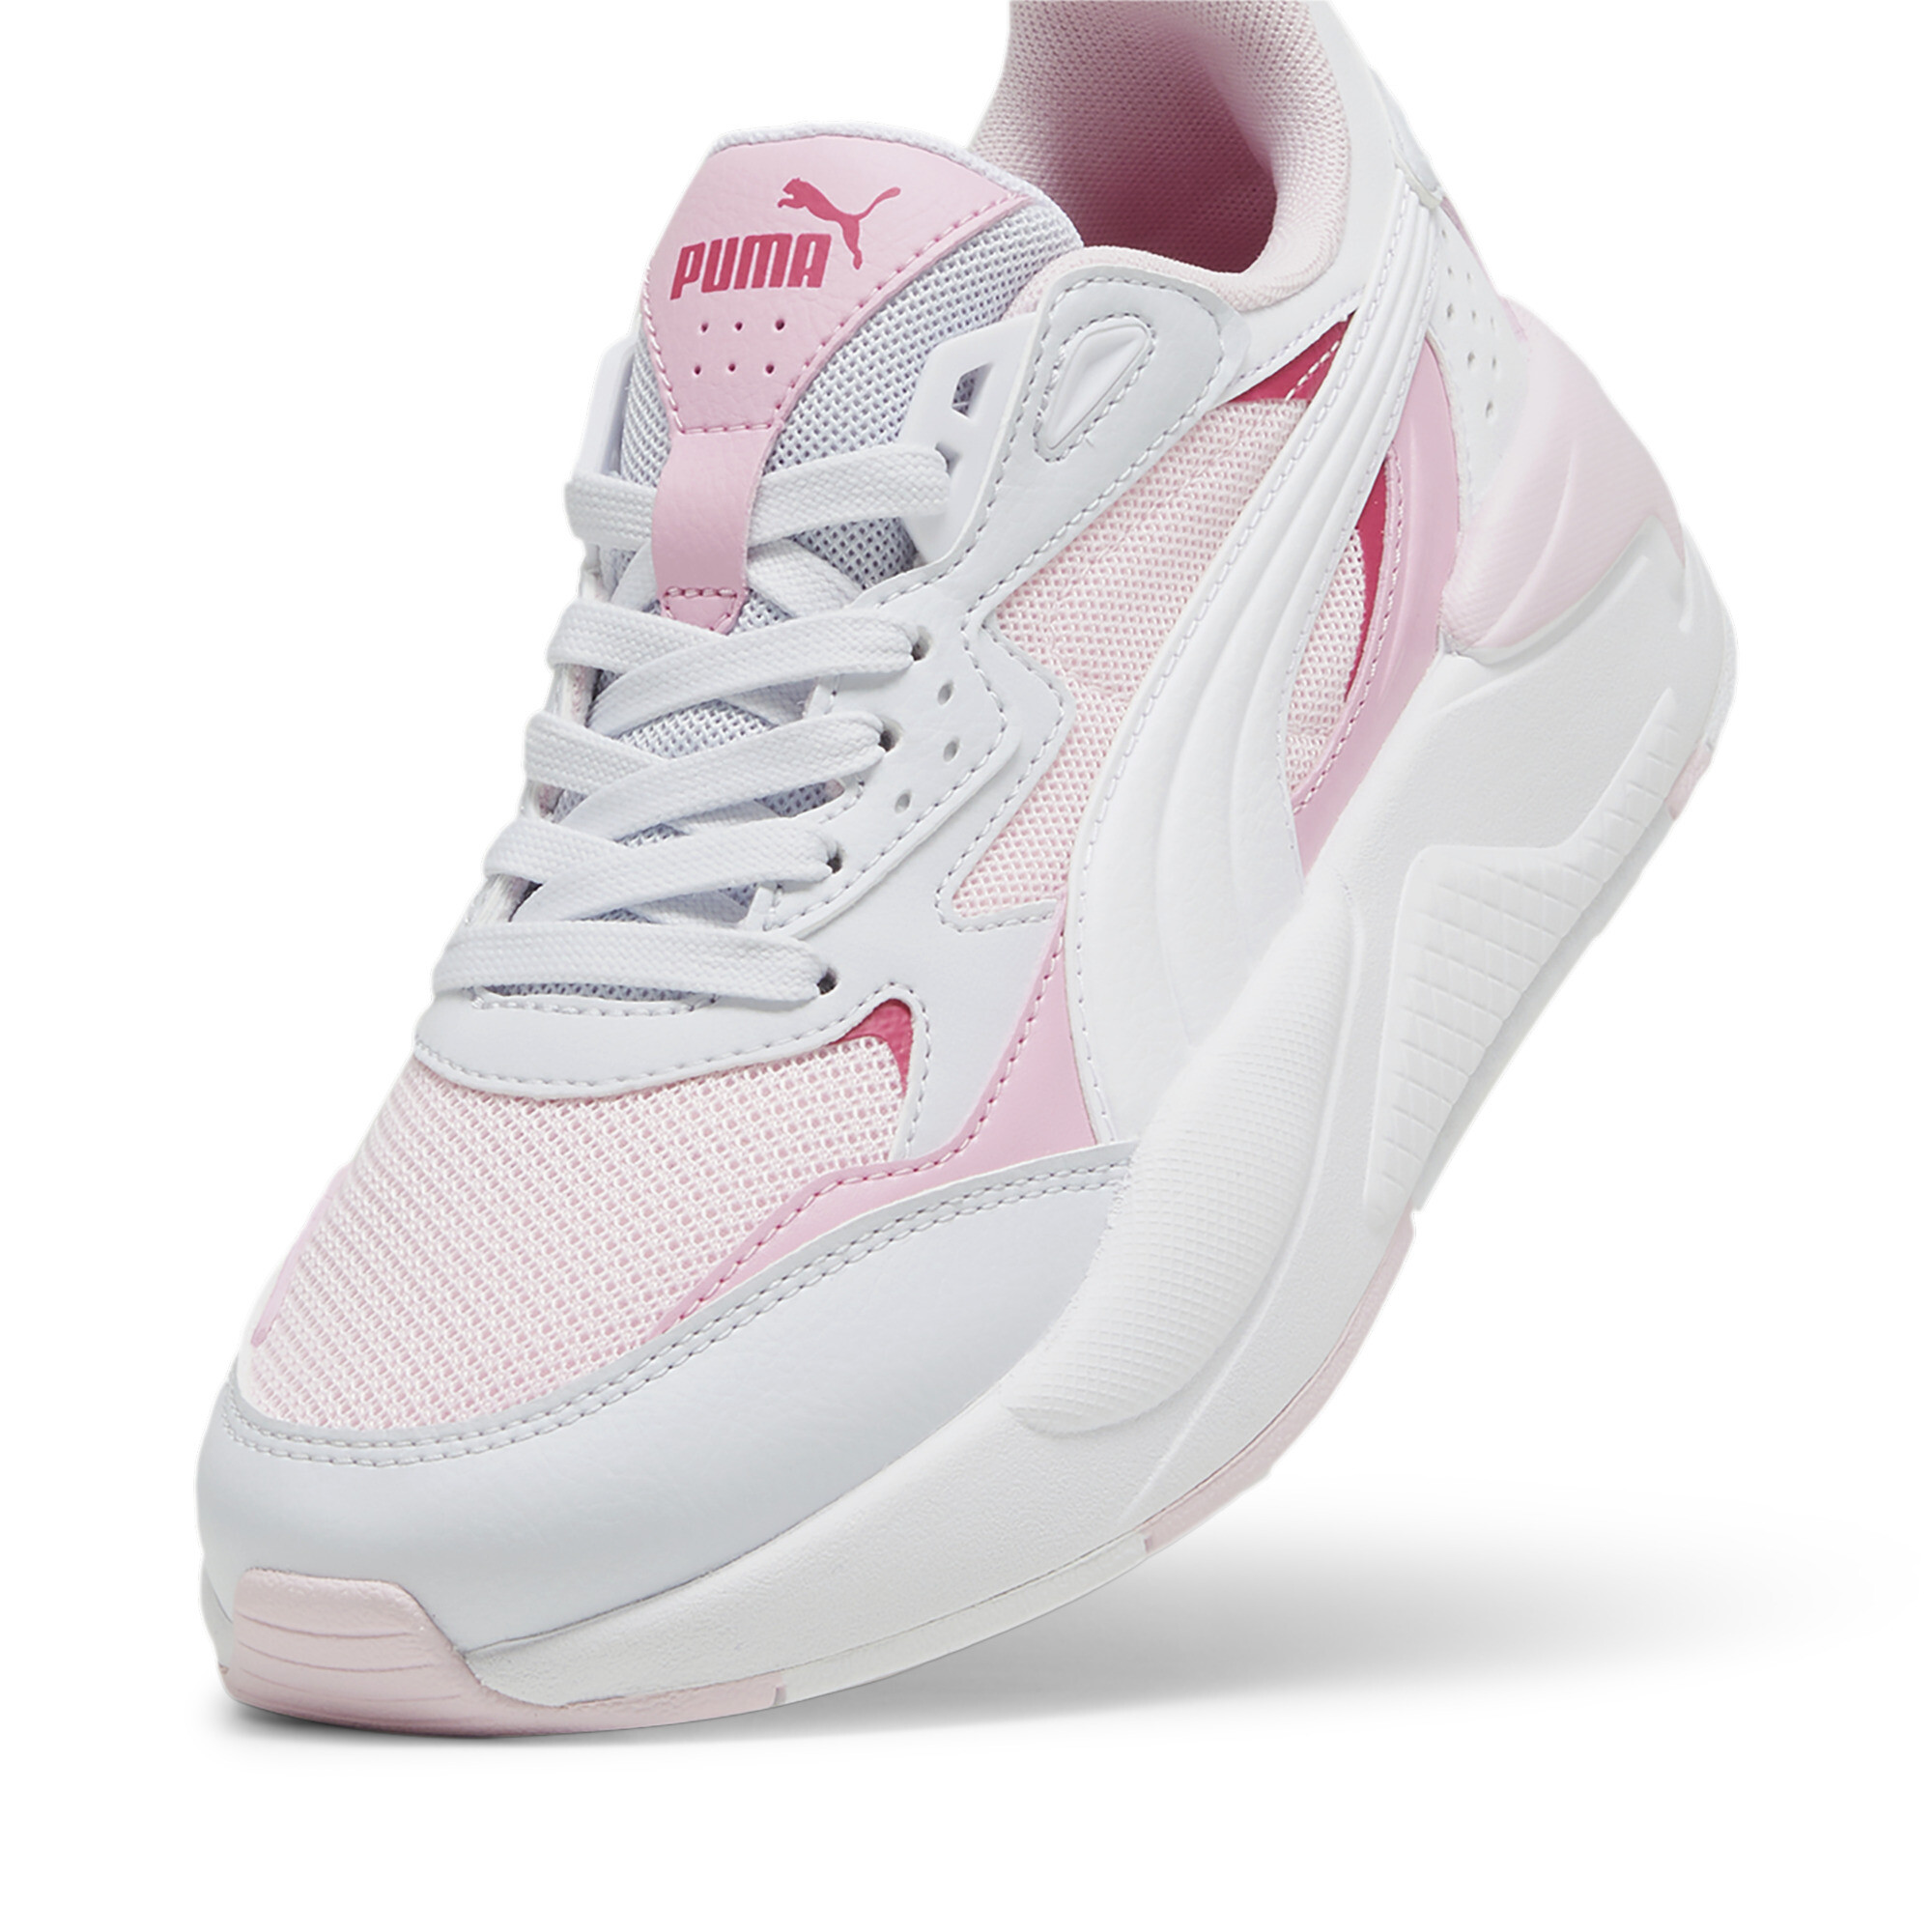 Puma X-Ray Speed Youth Trainers, Pink, Size 36, Shoes